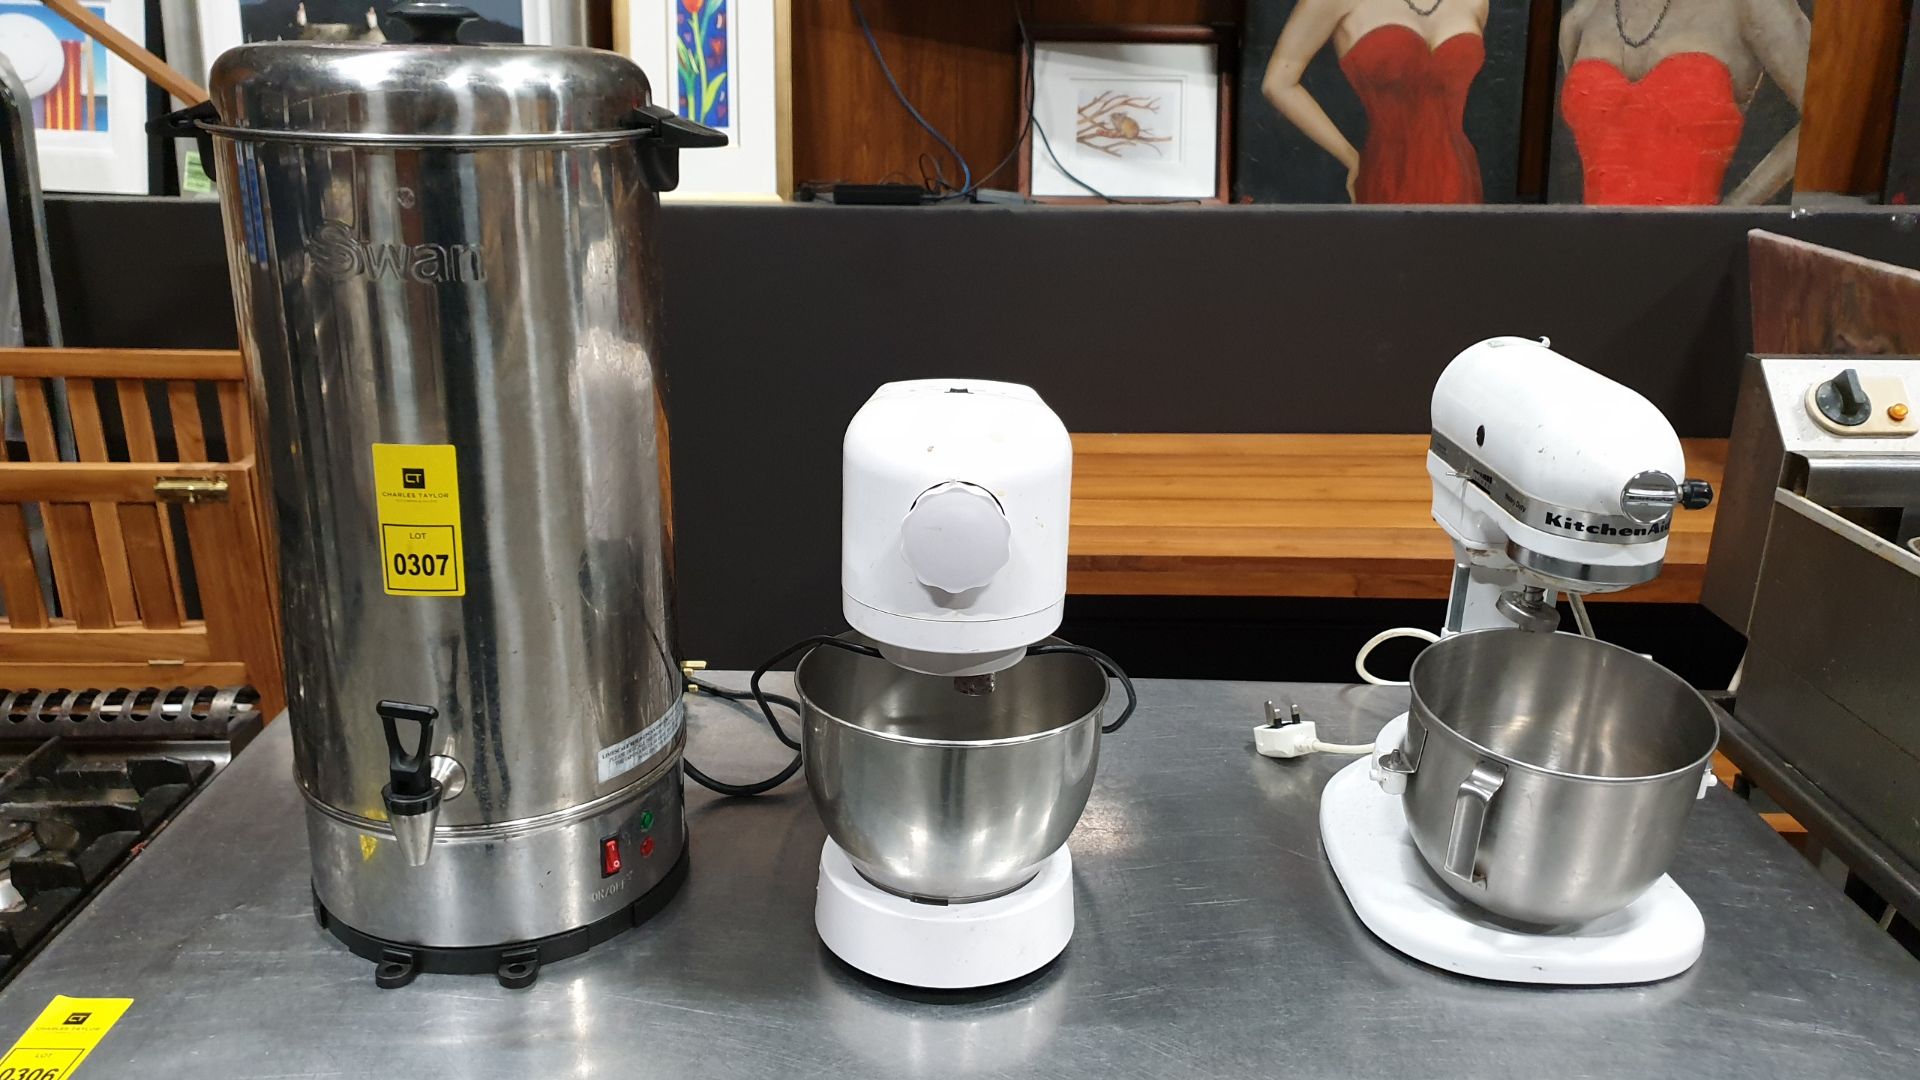 3 X ITEMS TO INCLUDE, 1 X (SWAN) HOT WATER DISPENSER, 1 X (KITCHEN AID) HEAVY DUTY PLANETARY